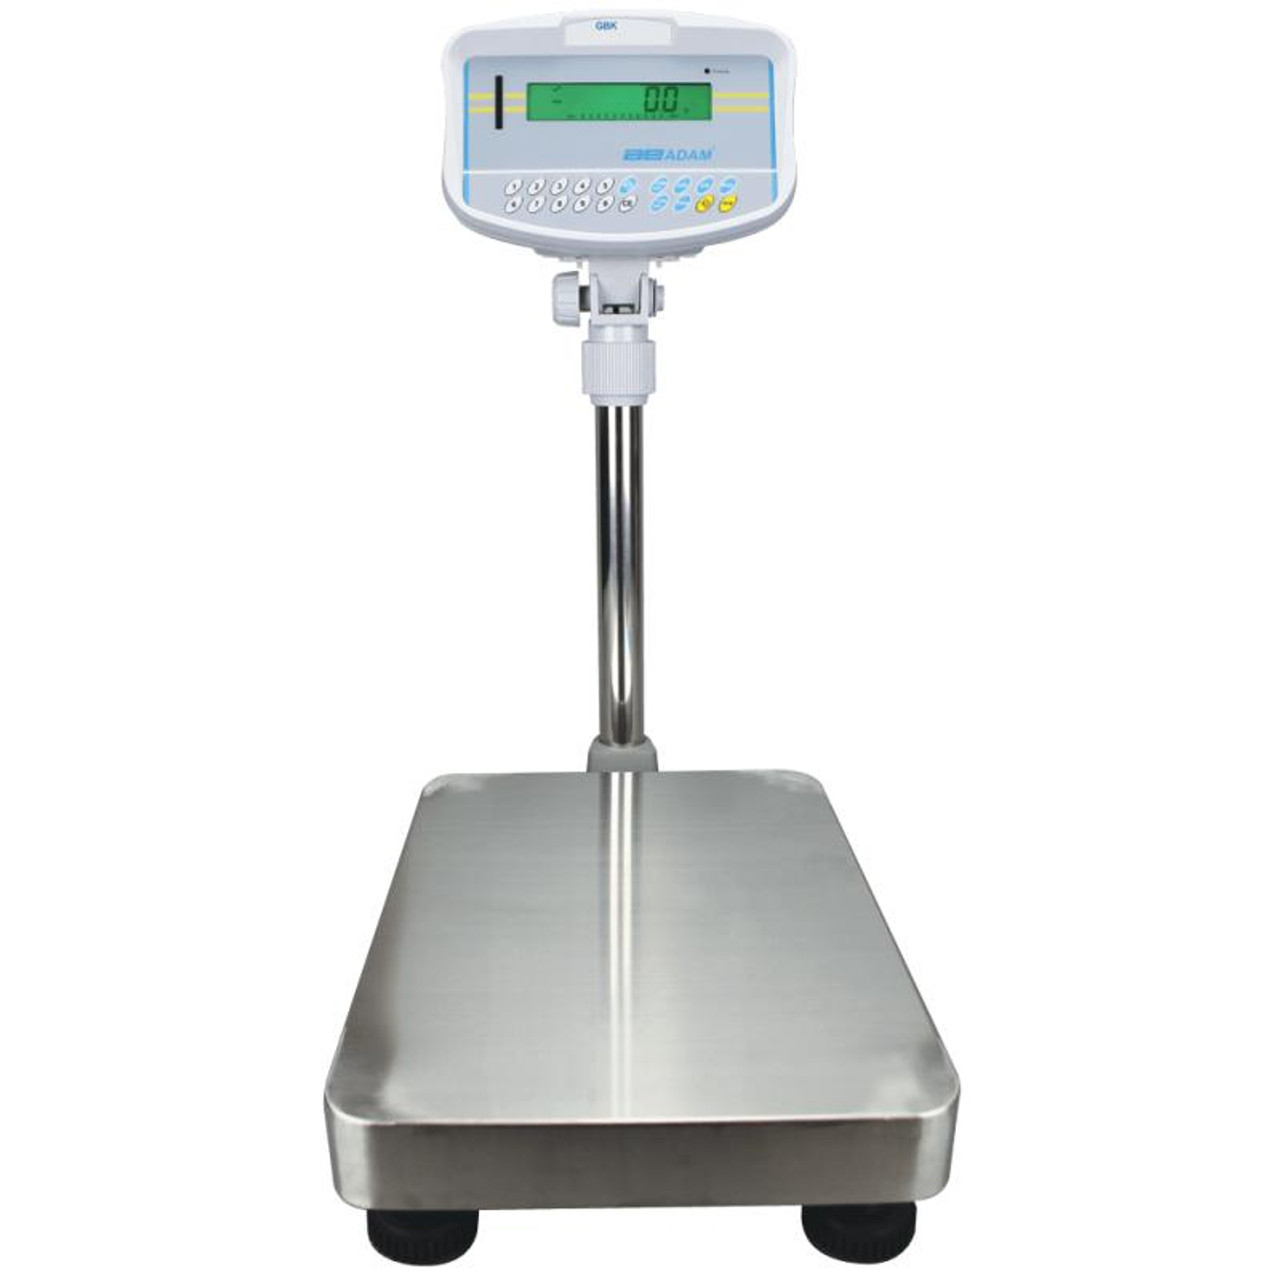 Adam Equipment GBK 70a Bench Checkweighing Scale Scales Plus